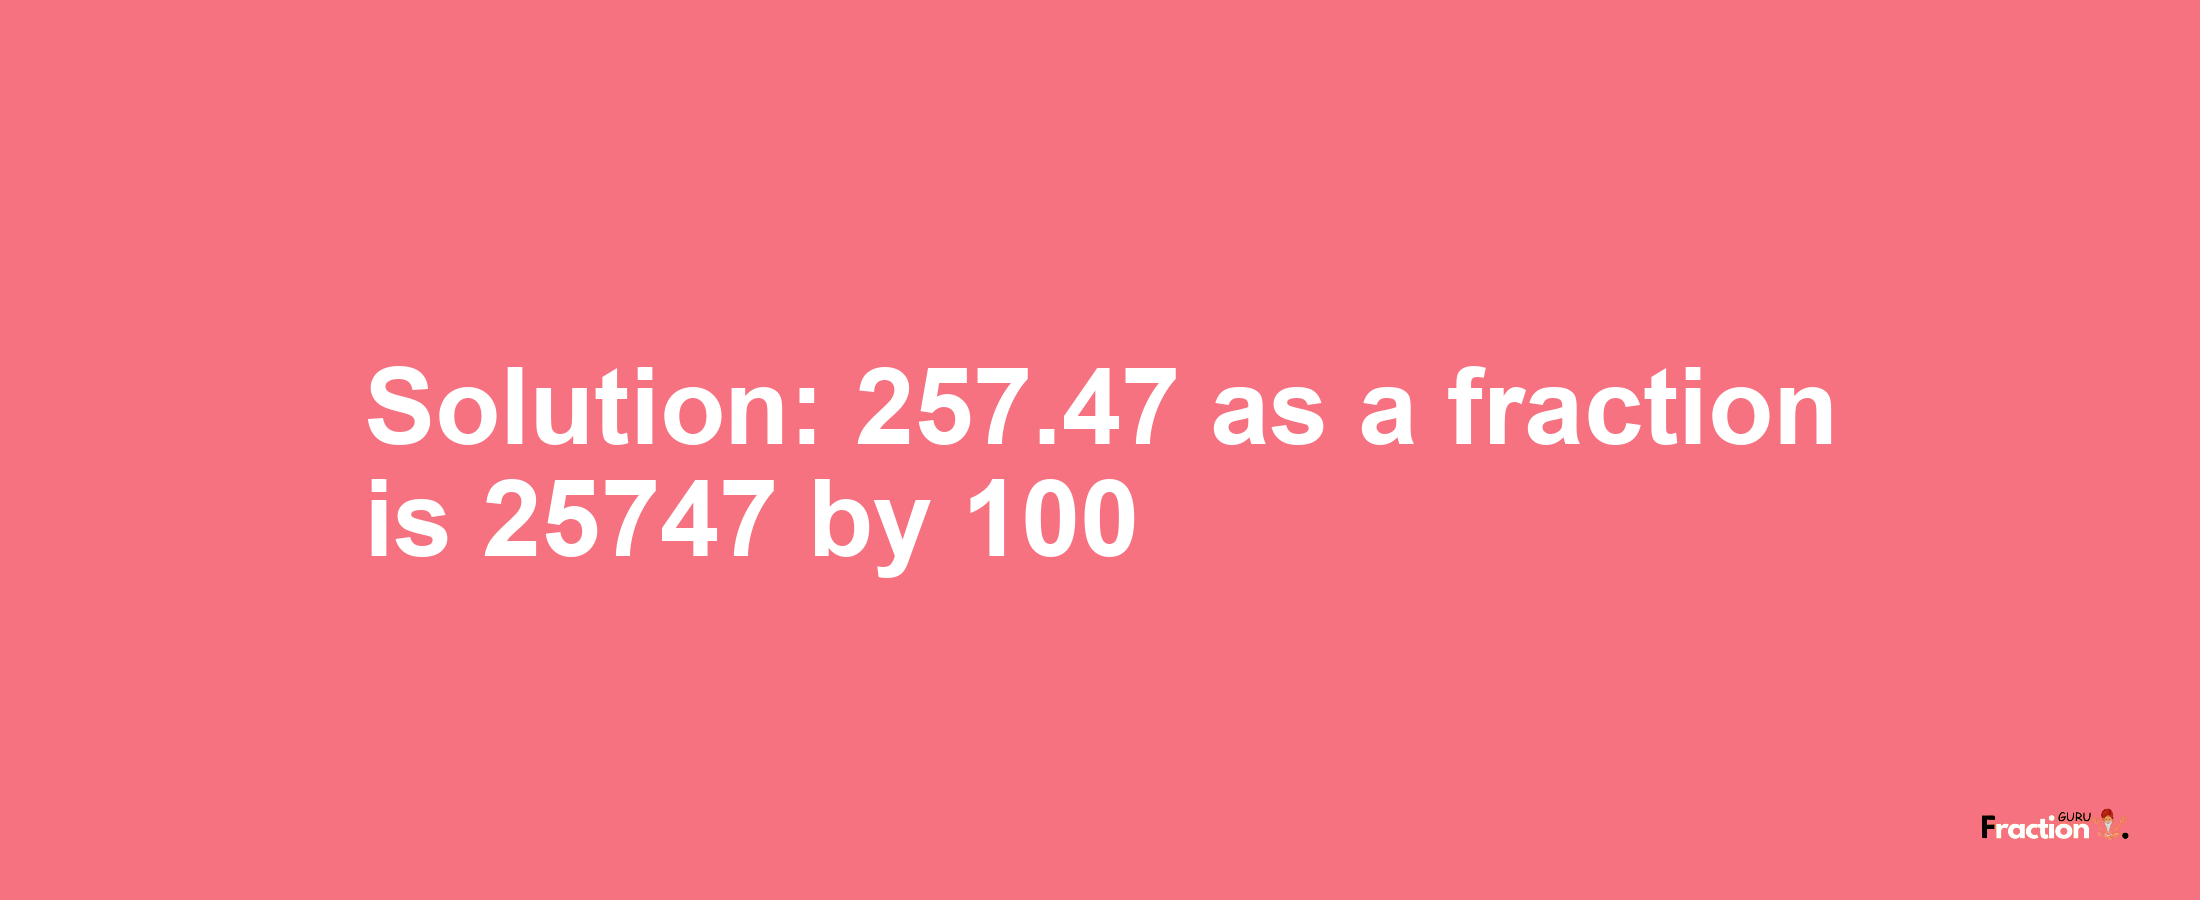 Solution:257.47 as a fraction is 25747/100